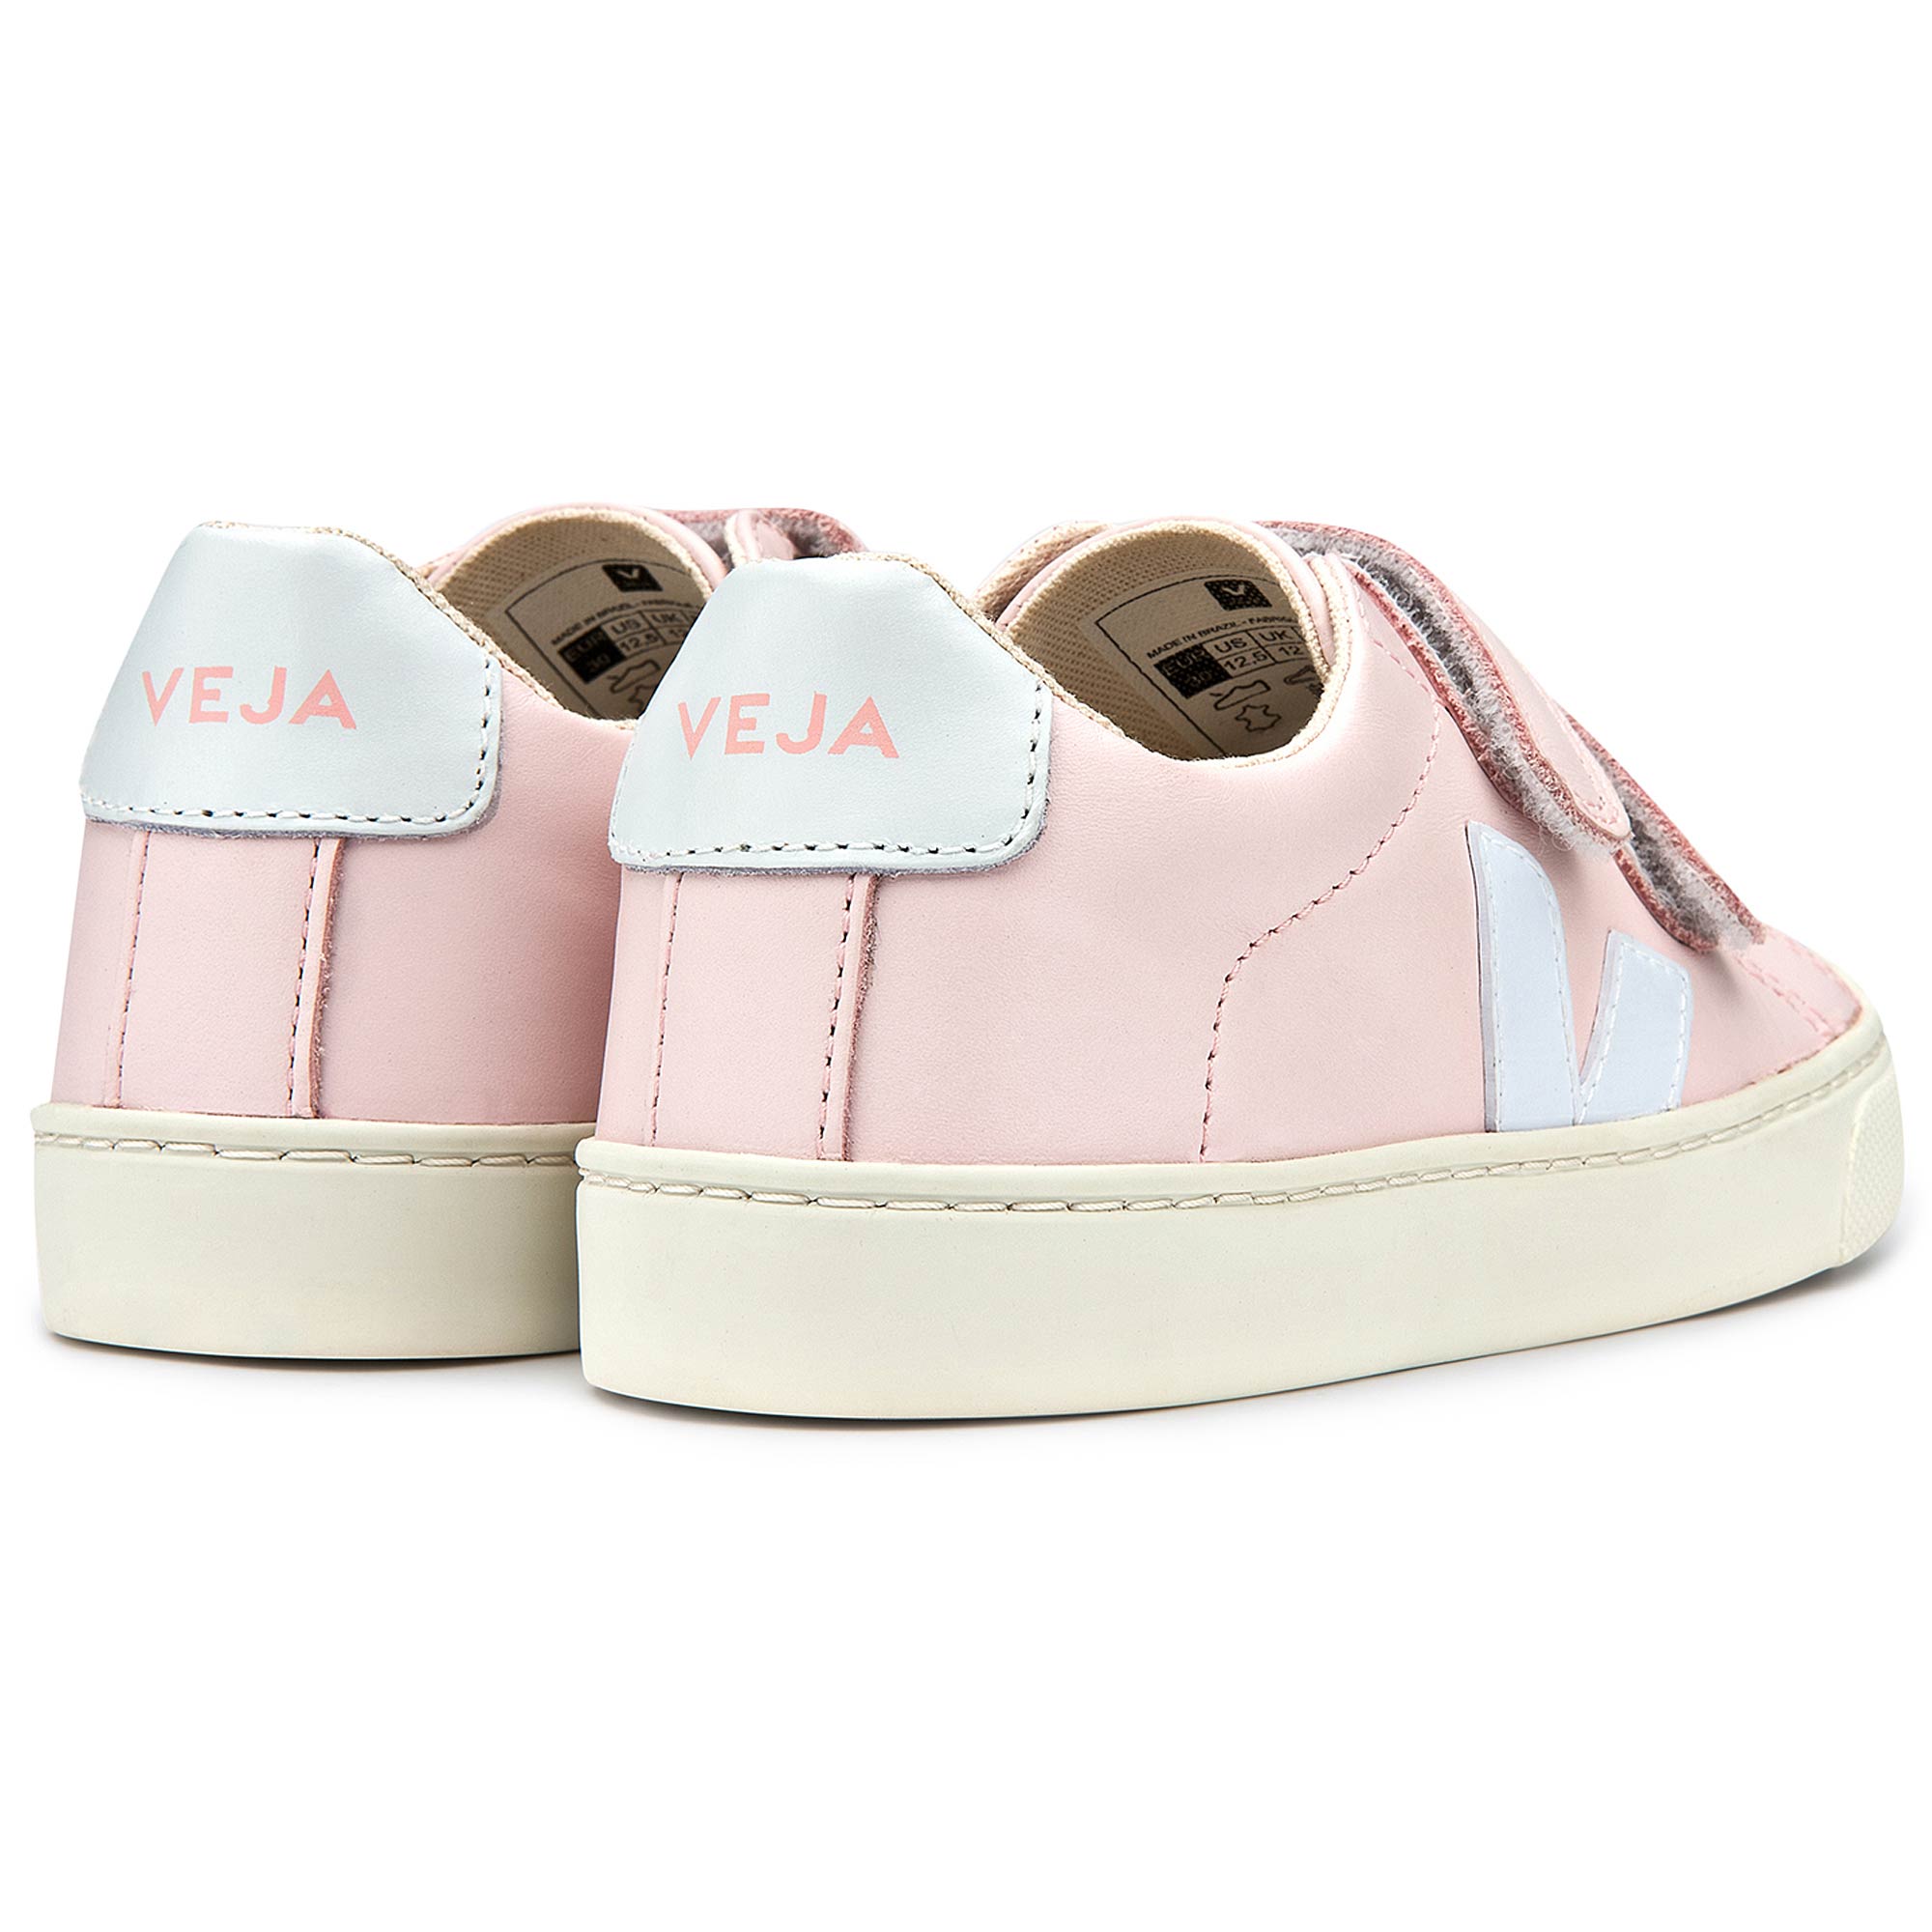 Girls  Pink   Leather Velcro   With  White  "V" Shoes